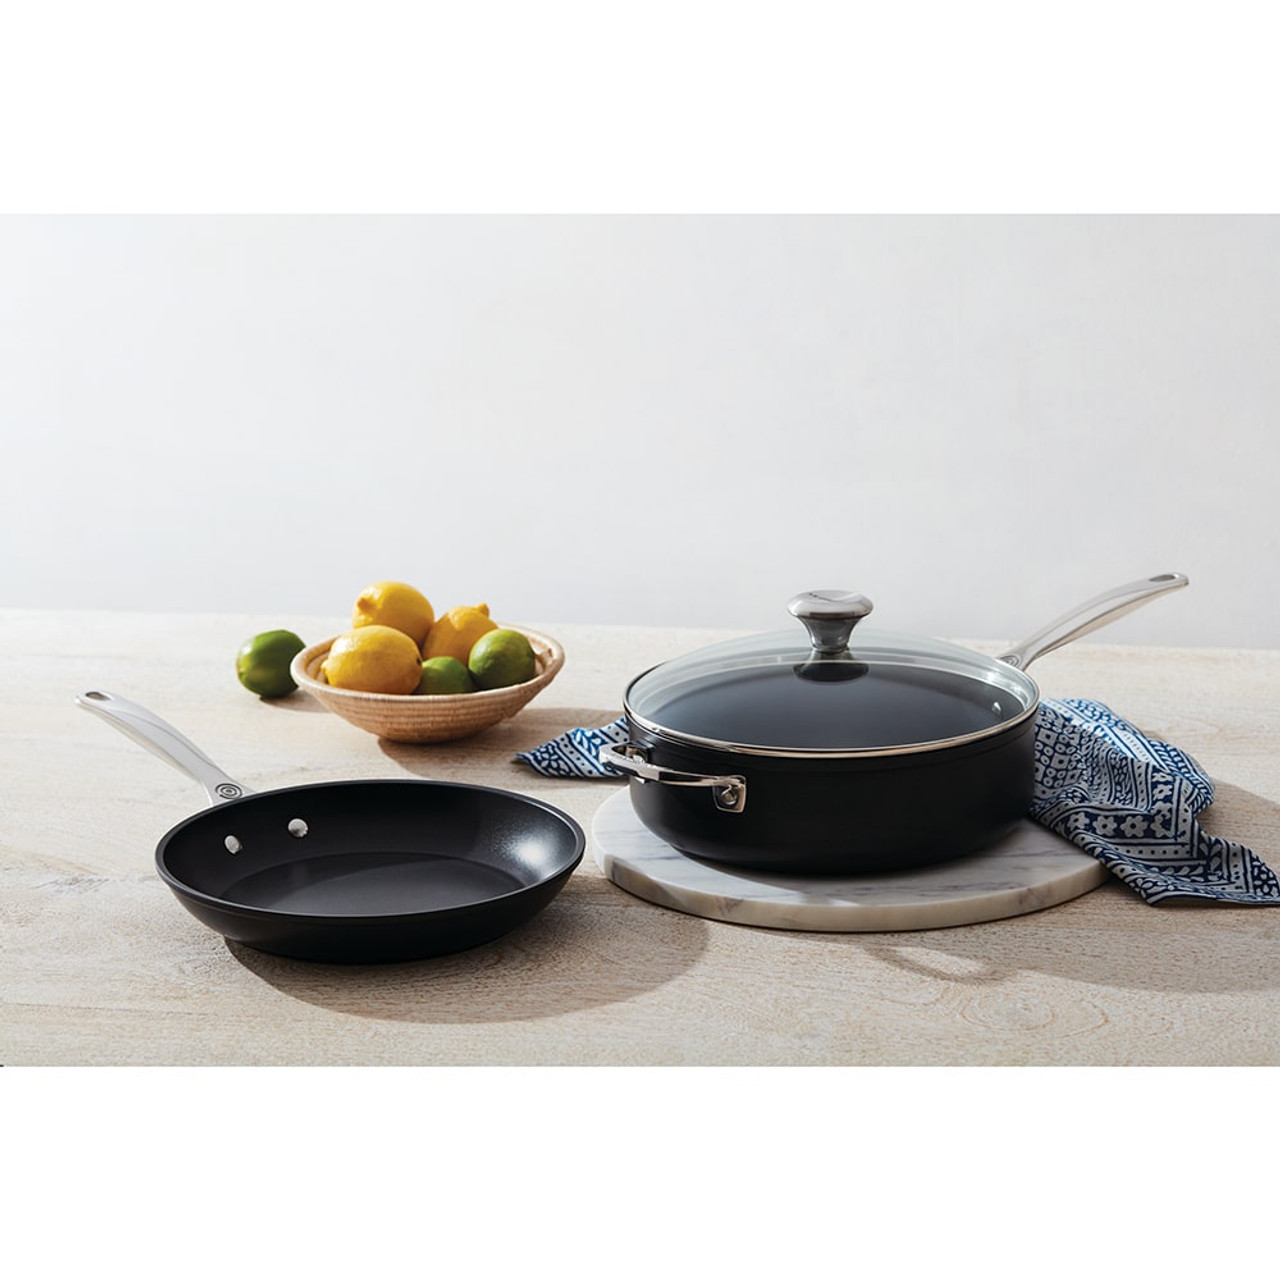 https://cdn11.bigcommerce.com/s-hccytny0od/images/stencil/1280x1280/products/3304/11830/le-creuset-tns-pro-3pc-cookware-set-1__46675.1592344332.jpg?c=2?imbypass=on